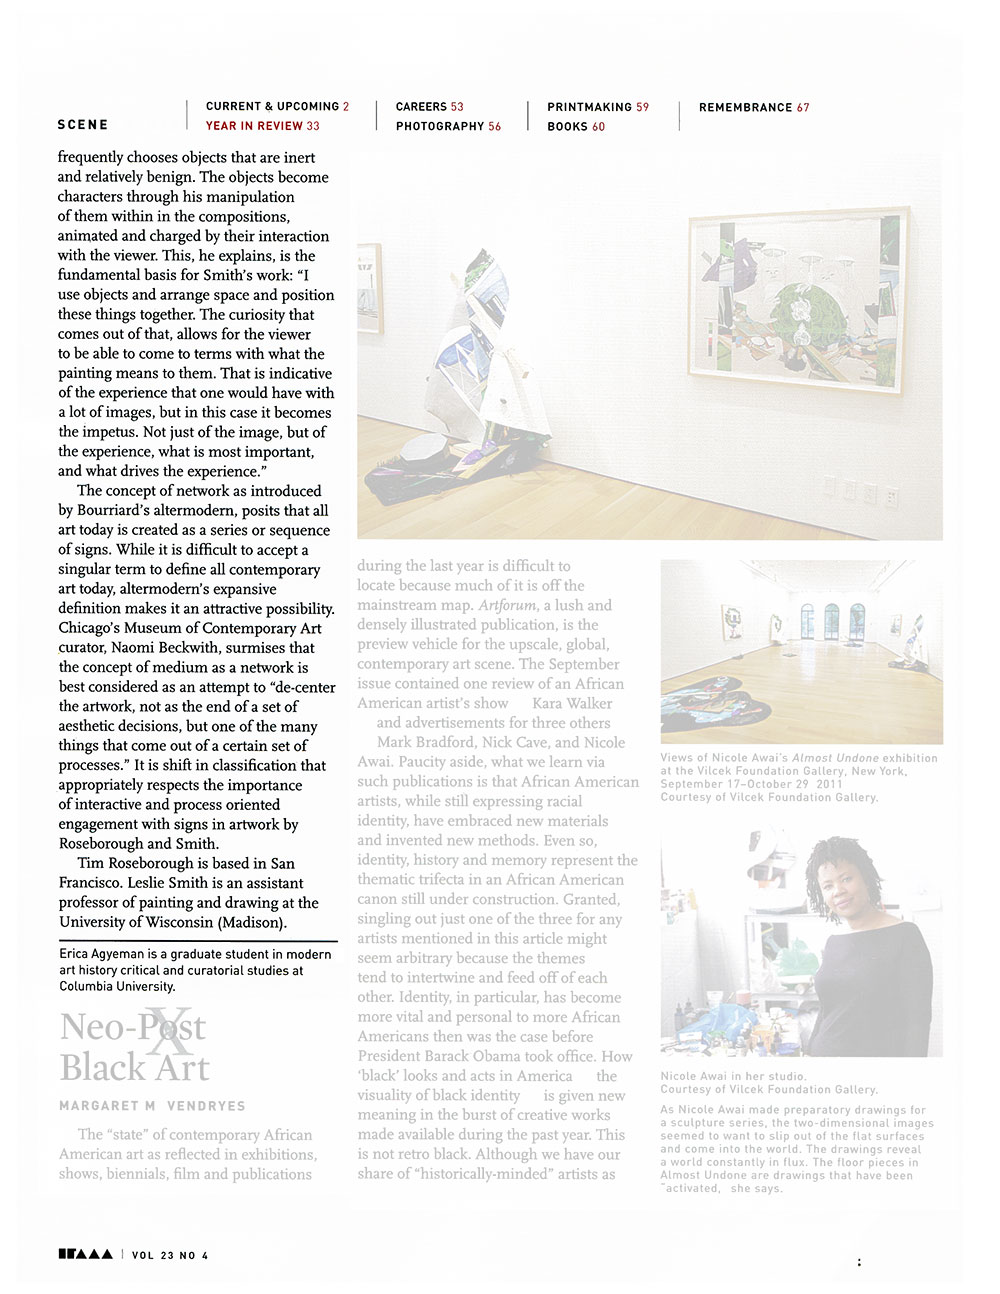 The International Review of African American Art